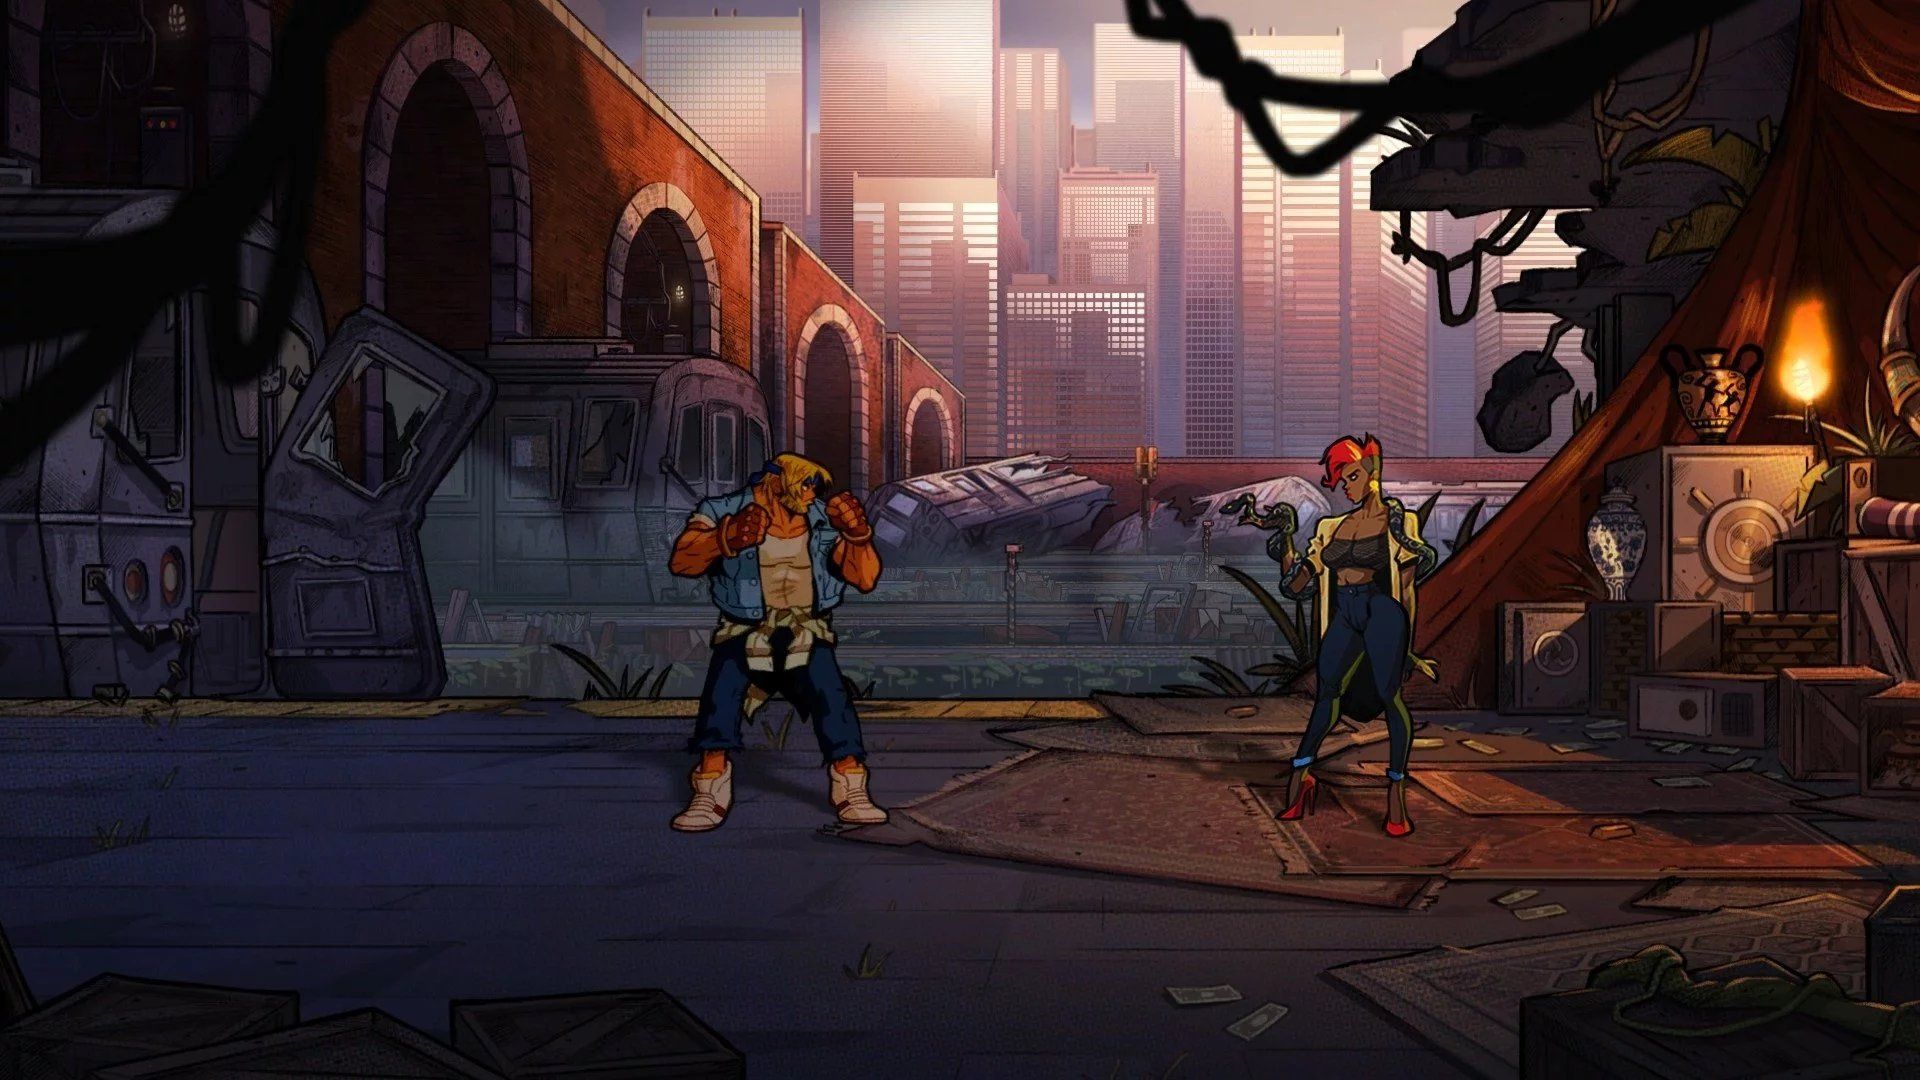 Gallery: There's No Need To Bash These New Streets Of Rage 4